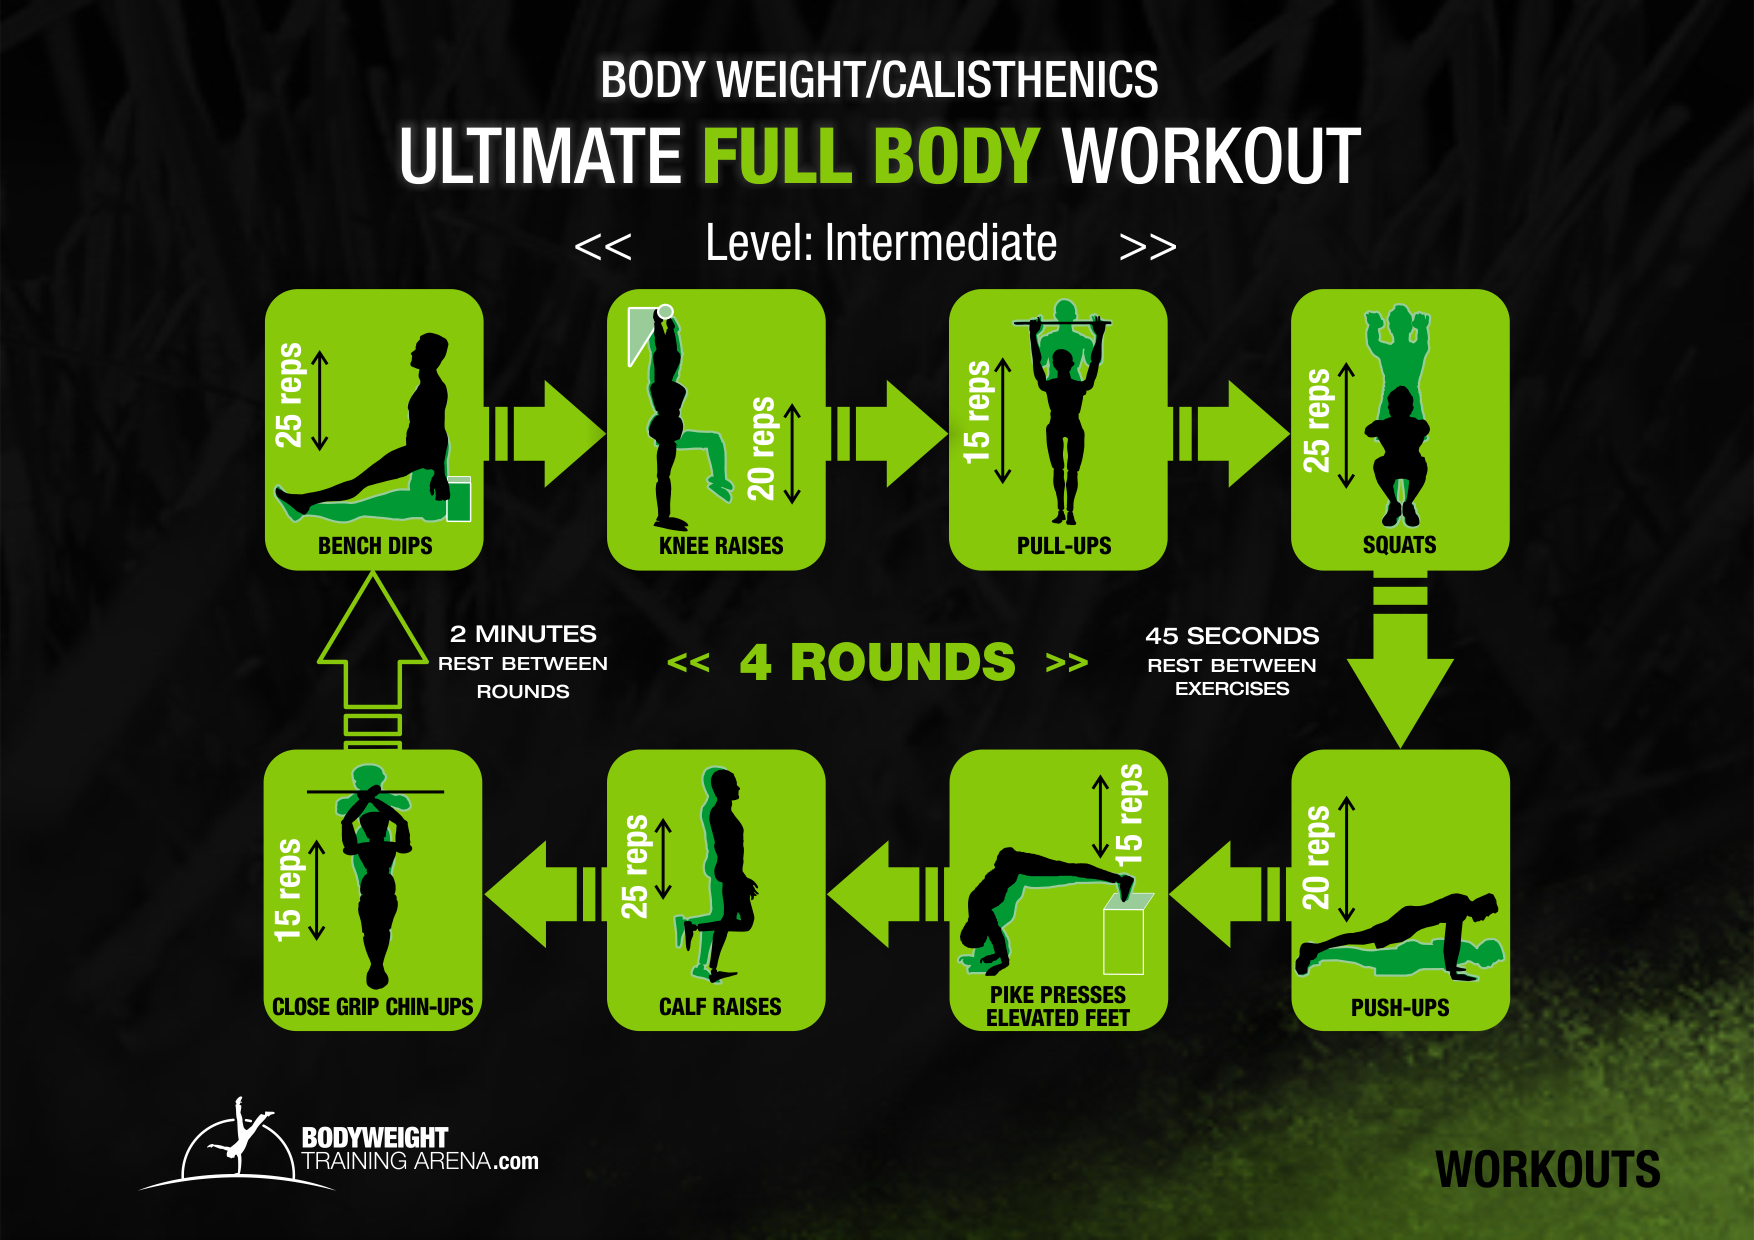 Download Full Body Workout Bodyweight Exercises Pics Full Body